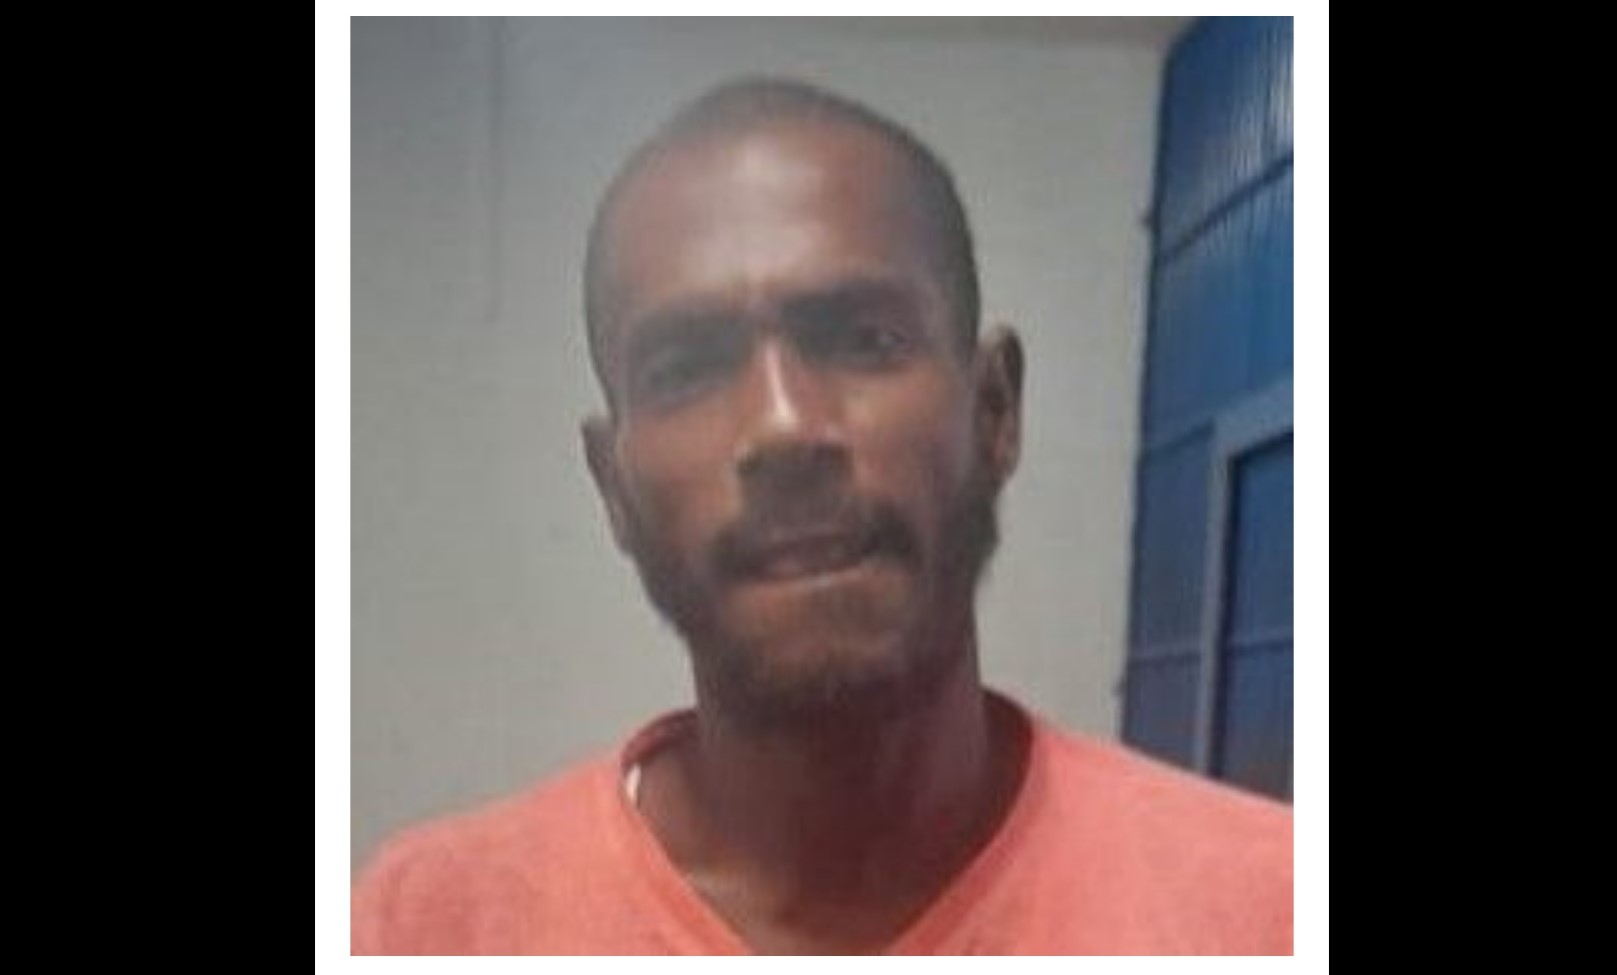 Search on for man who escaped police custody